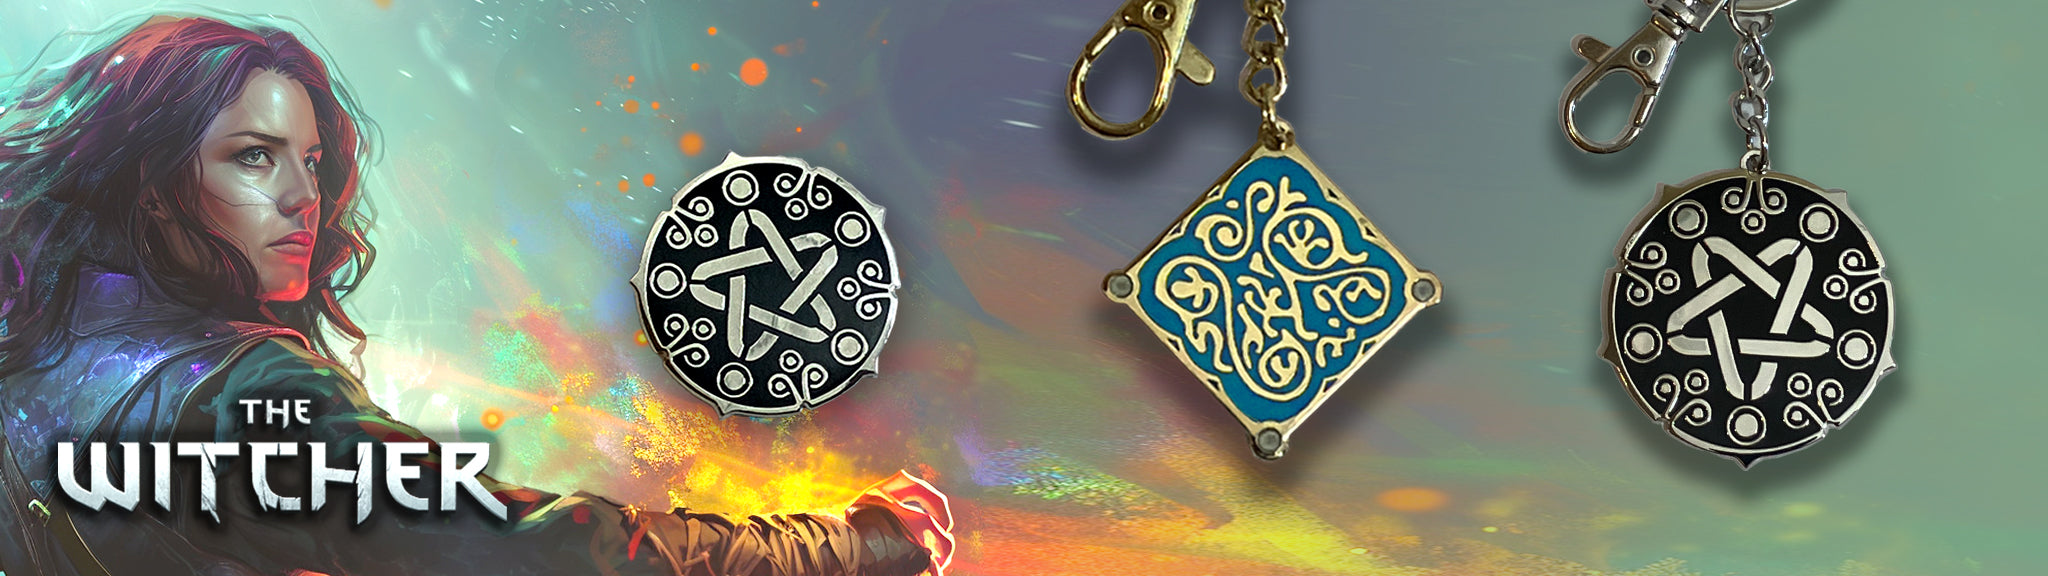  a The Witcher banner with Yennefer casting a spell and images of Yens symbol pin, symbol keychain and Triss's necklace penandt keychain